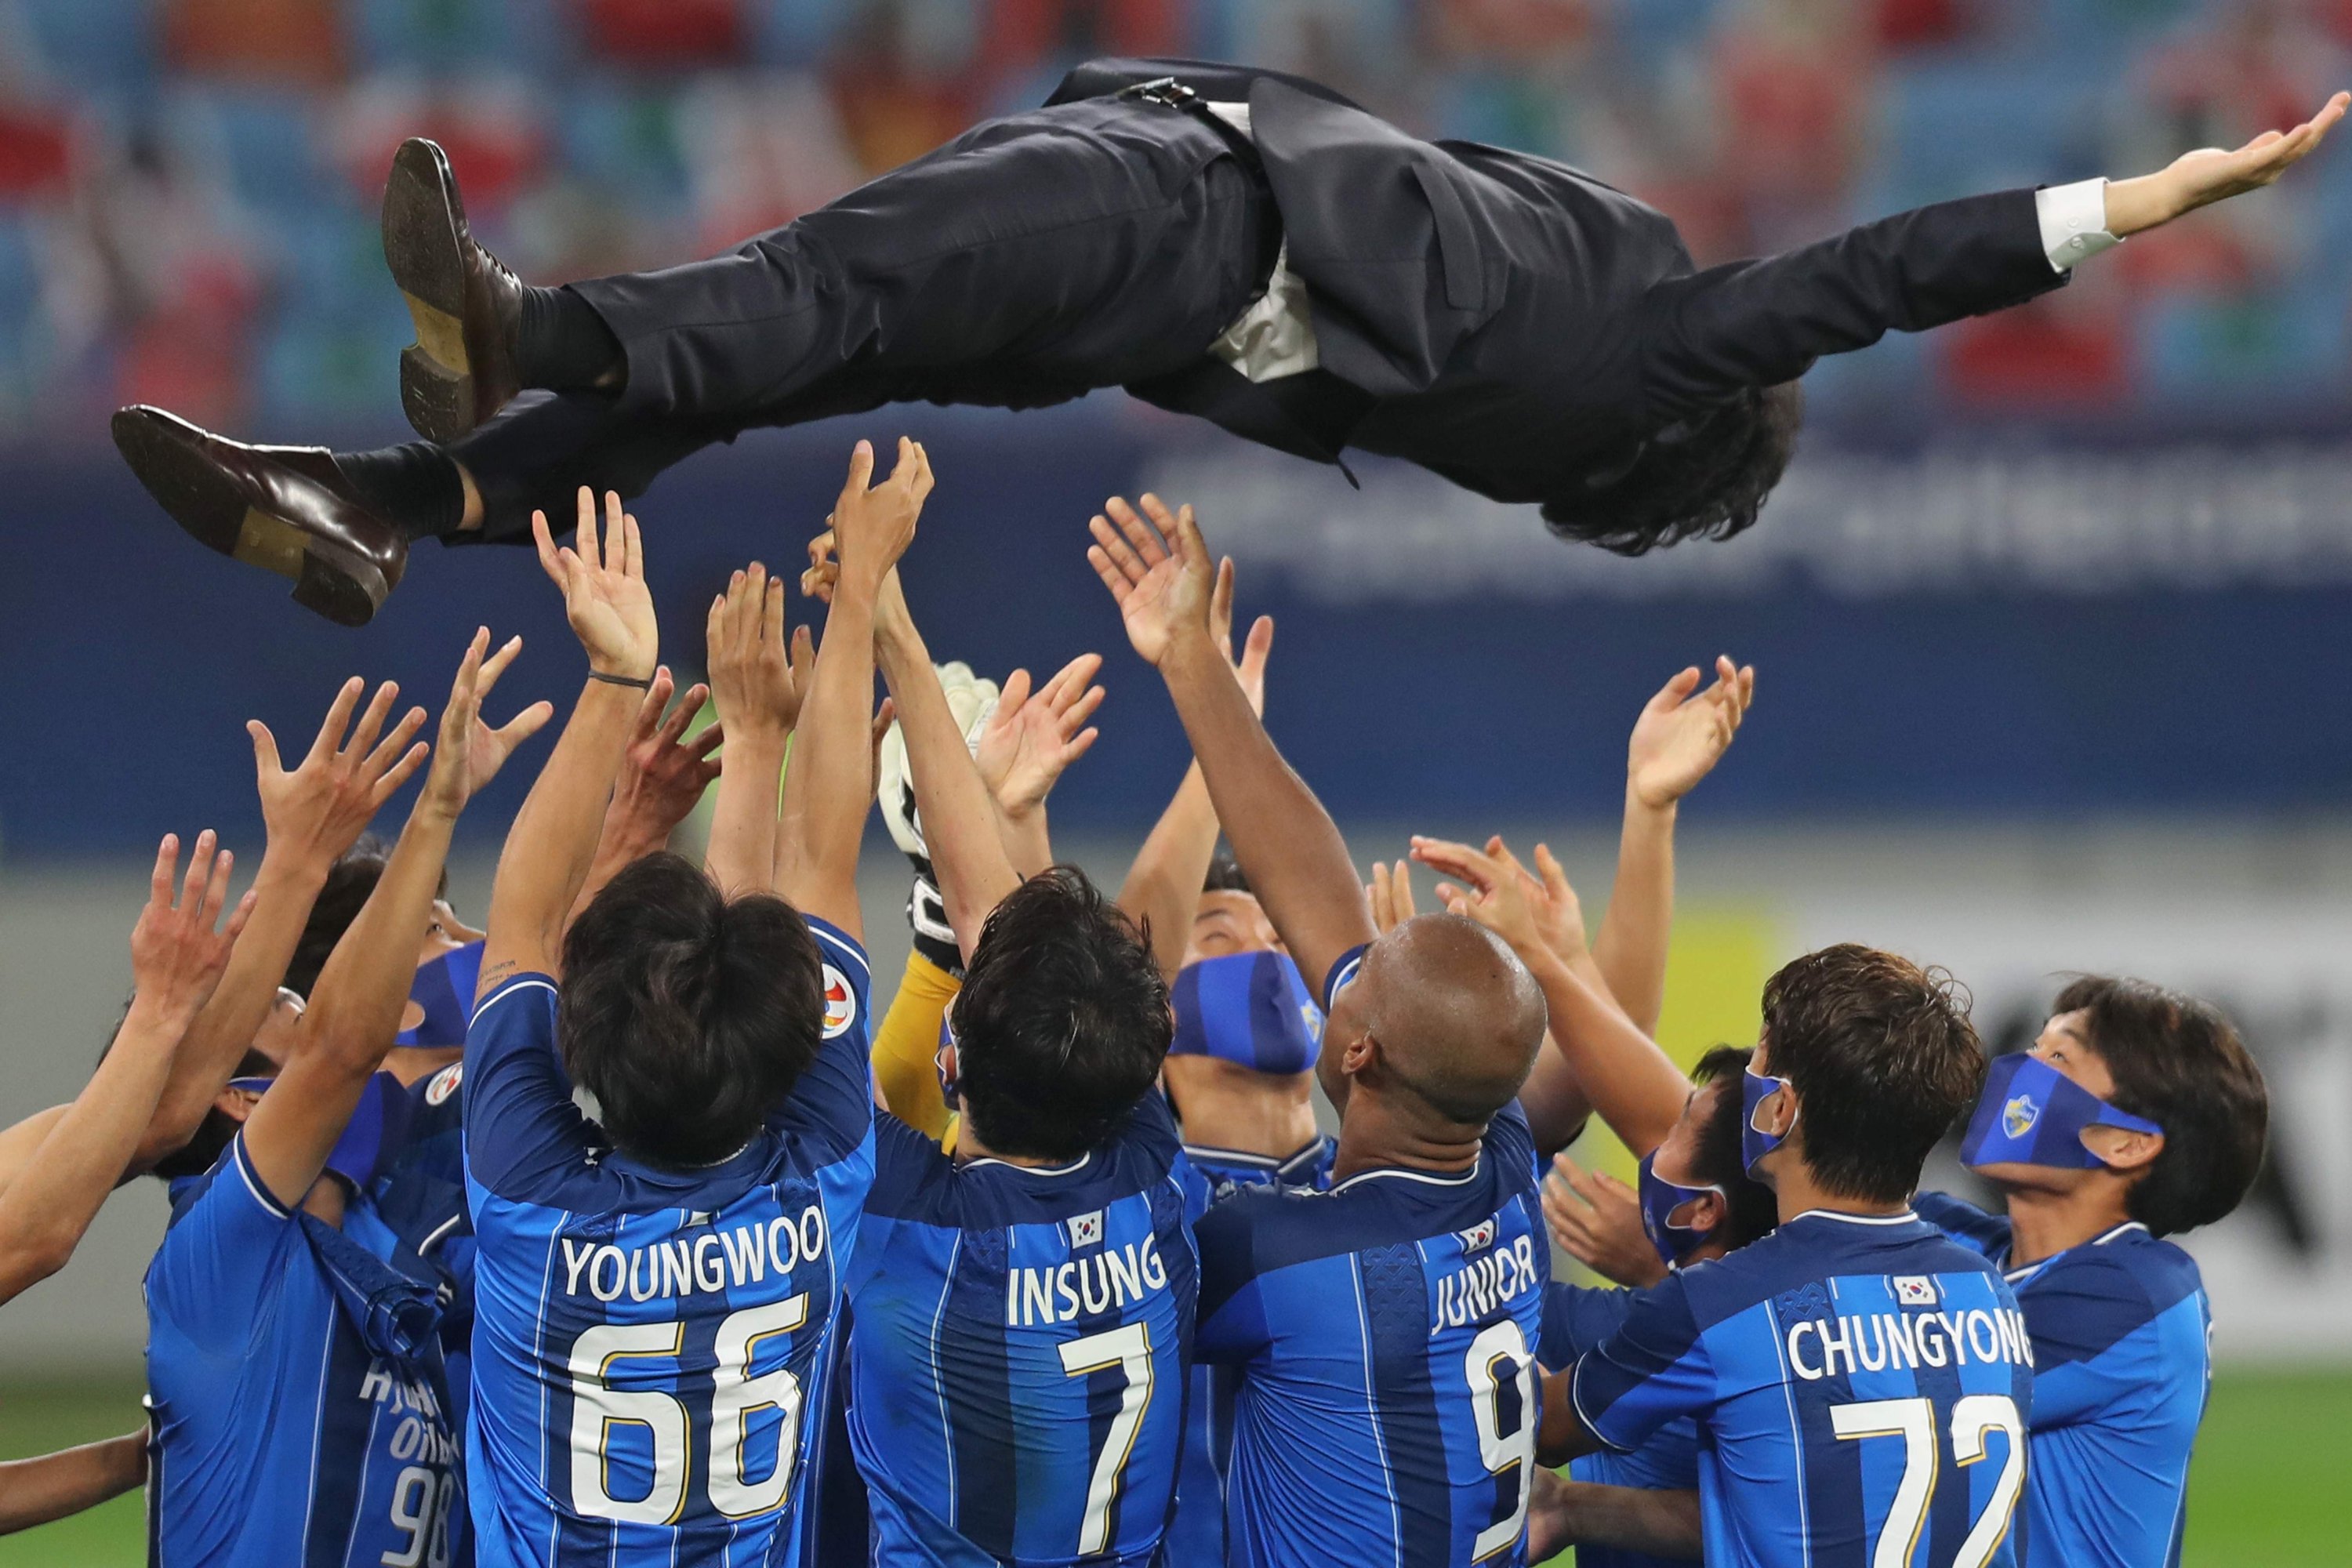 Ulsan's players celebrate their win with Hyundai Heavy Industries President Han Young-Seuk after winning the AFC Champions League finals football match between Iran's Persepolis and South Korea's Ulsan Hyundai at the al-Janoub Stadium in the Qatari city of Al Wakrah, Dec. 19, 2020. (AFP Photo)